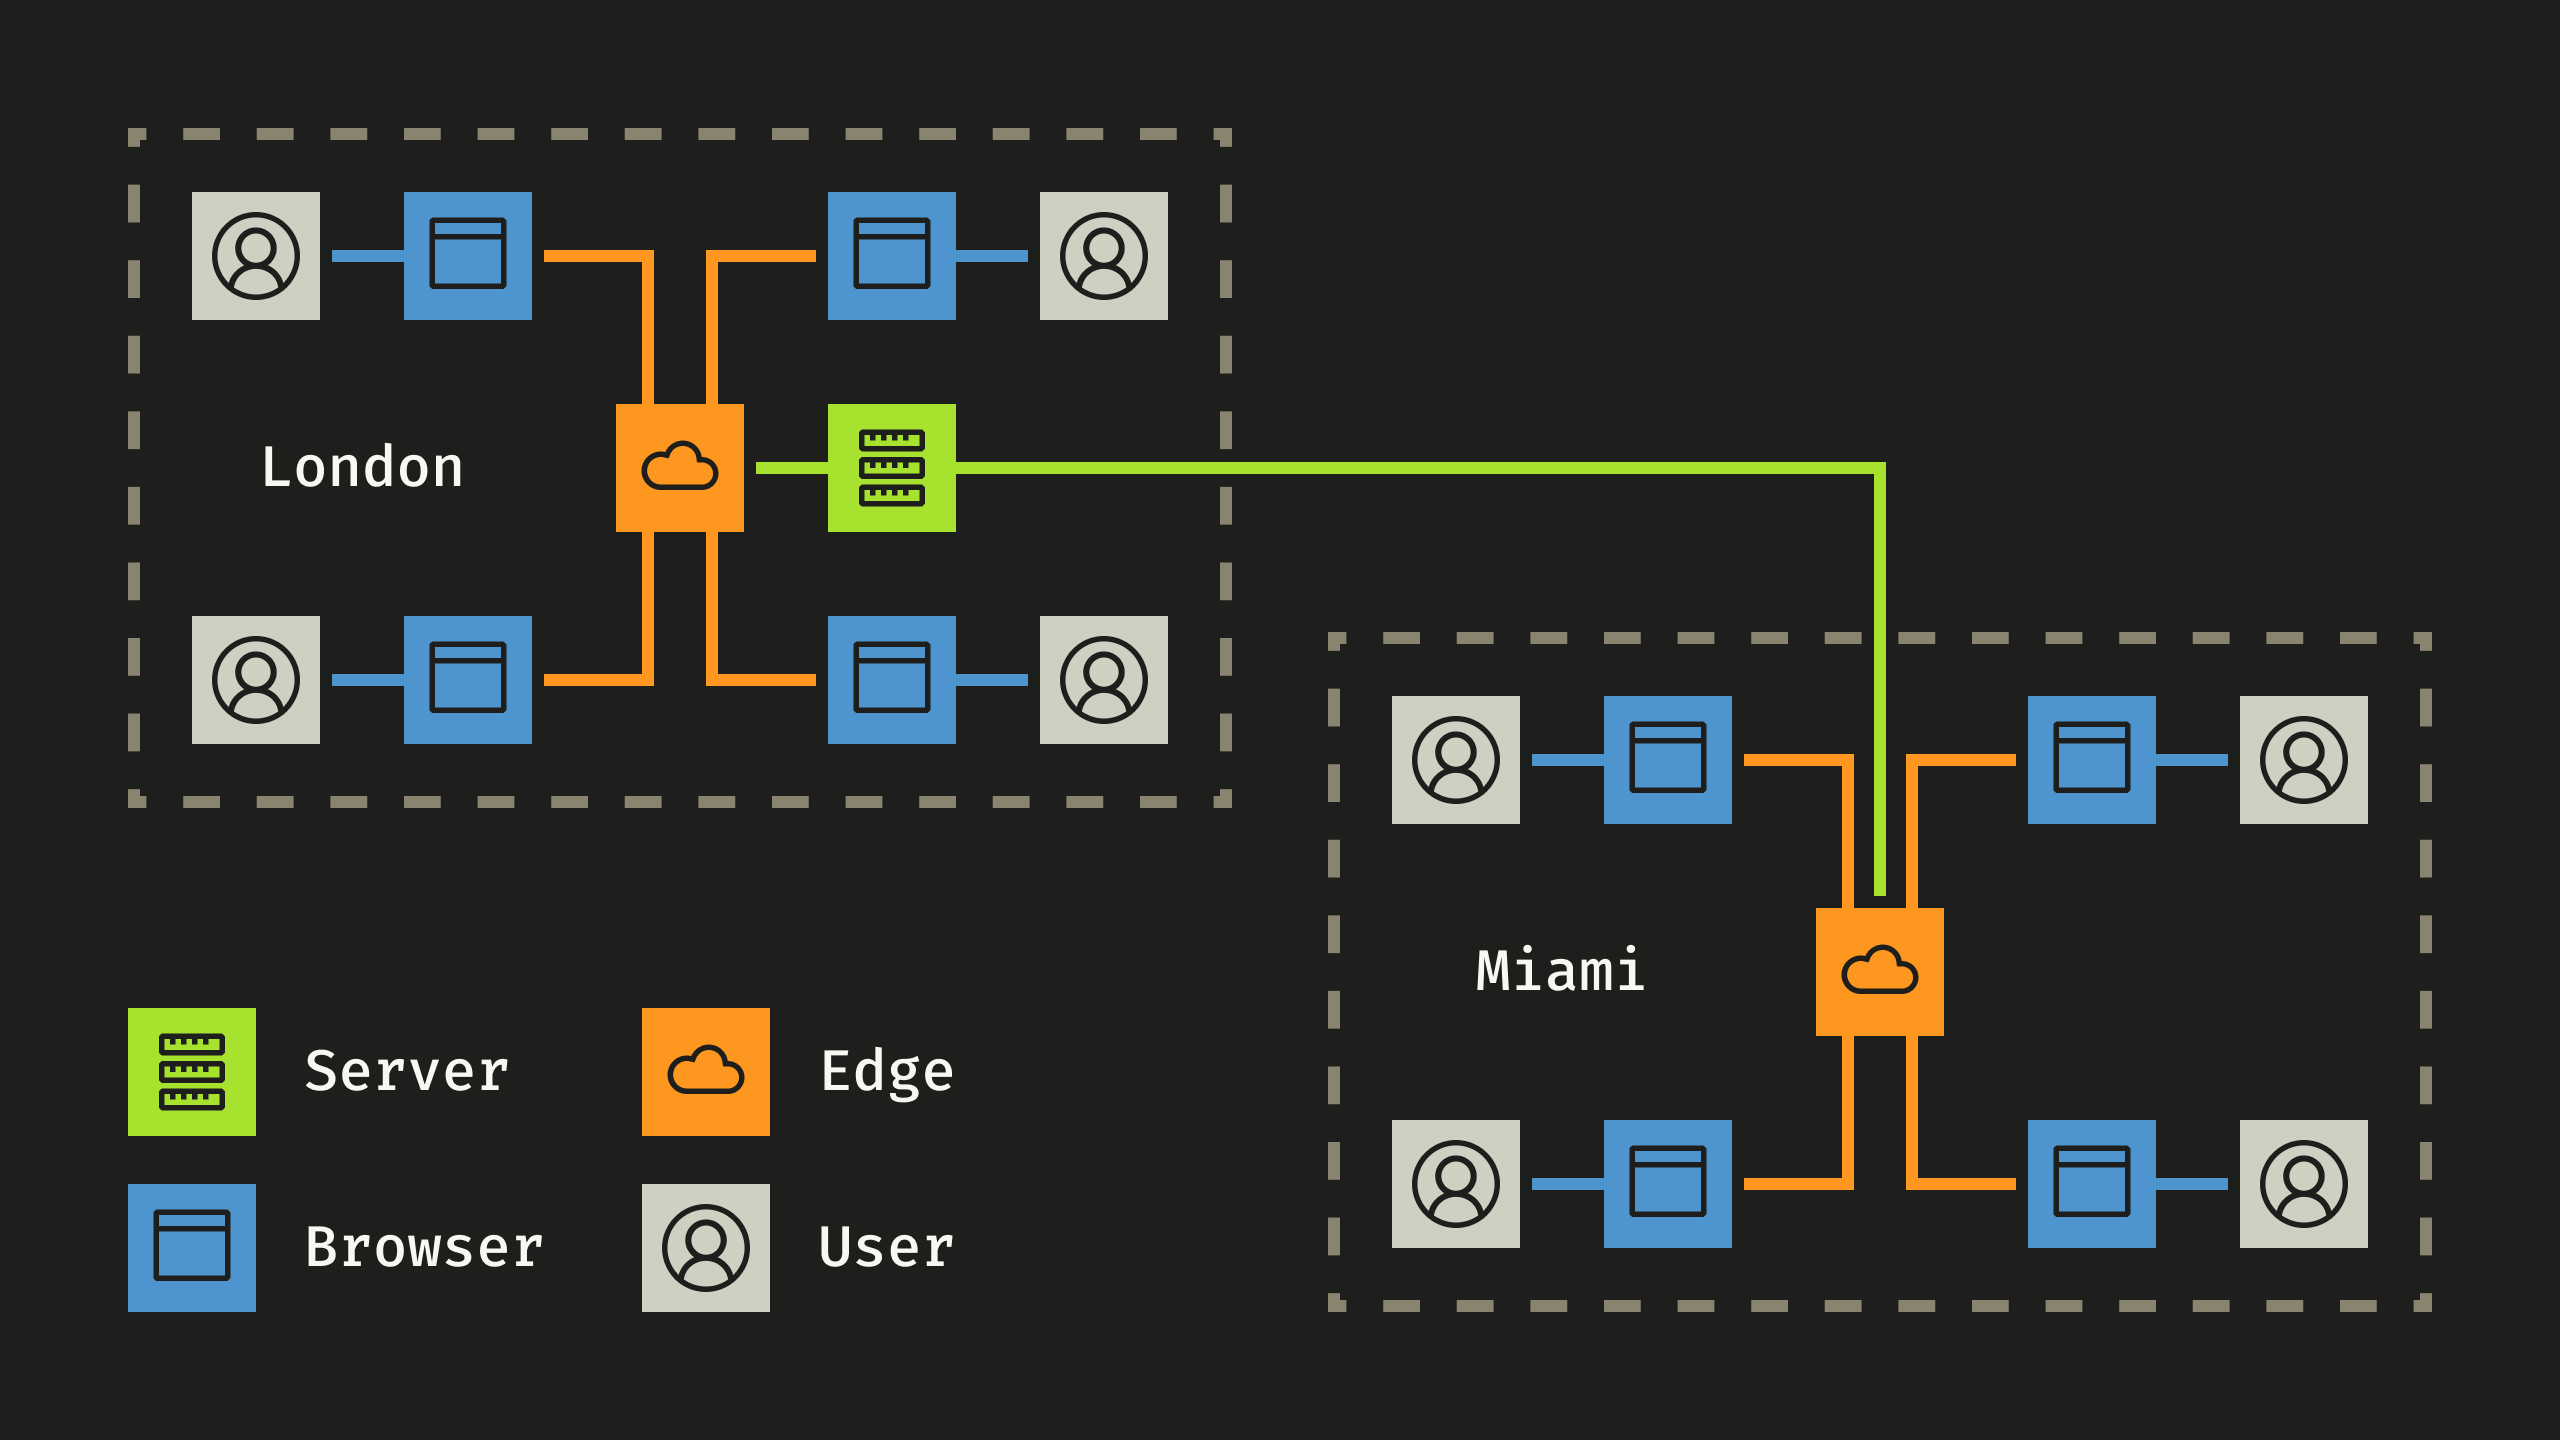 Diagram of the connection between server, CDN edge, browser, and user.